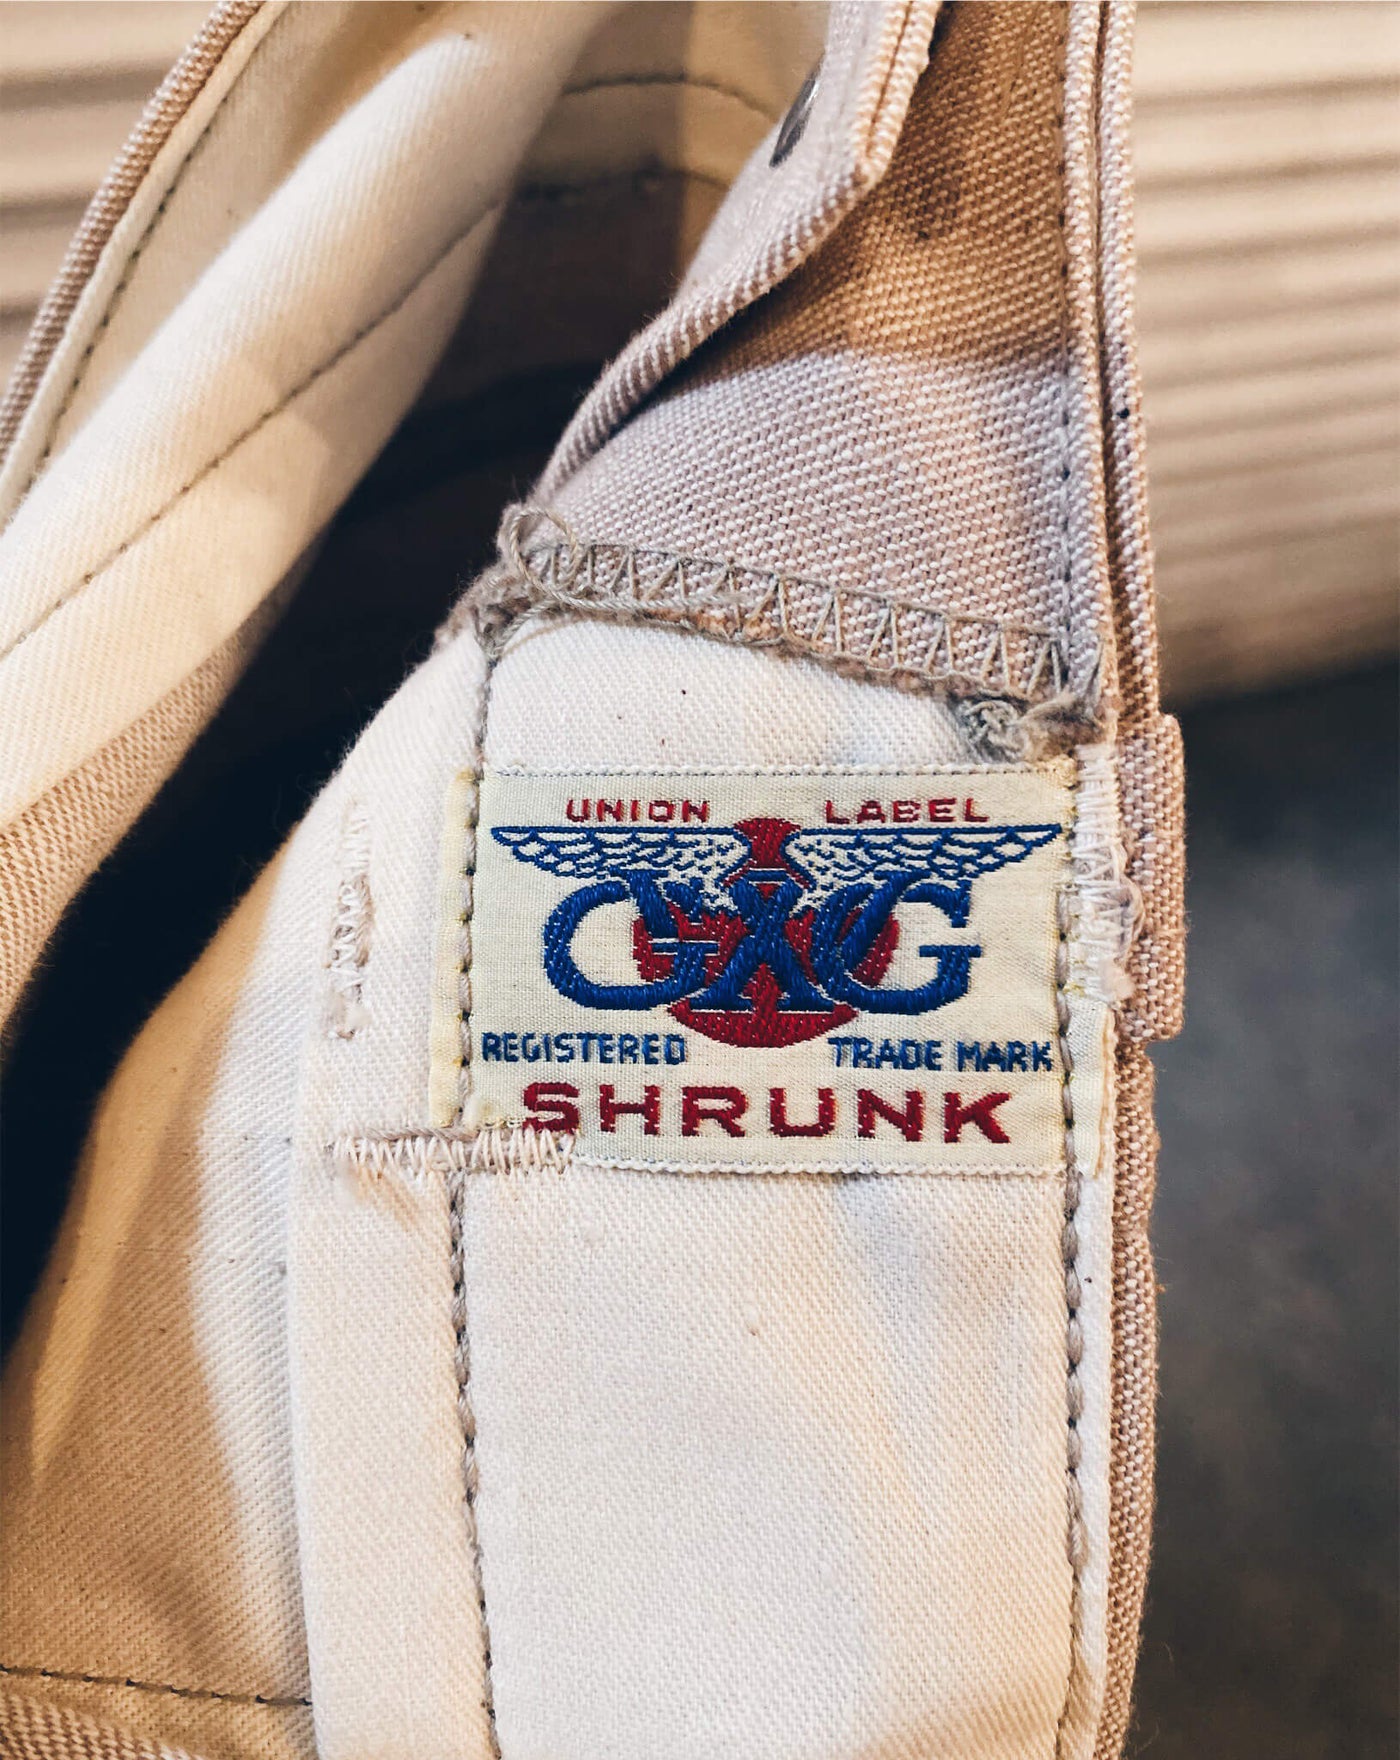 1960’s Snap Side Trousers.  Closeup of Union Label CMG Registered Trademark Shrunk.